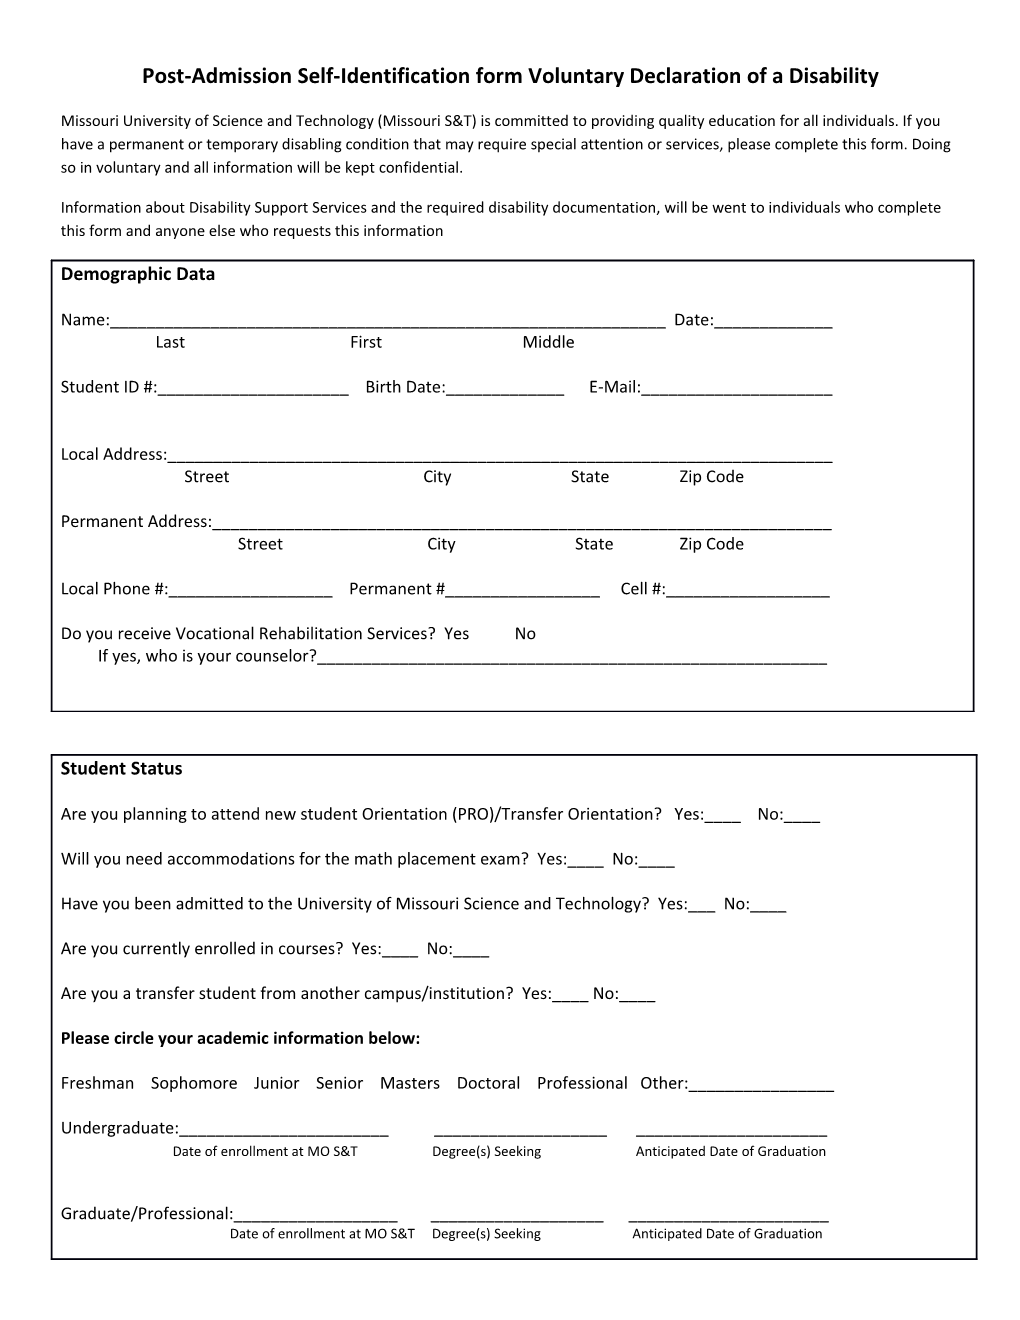 Post-Admission Self-Identification Form Voluntary Declaration of a Disability